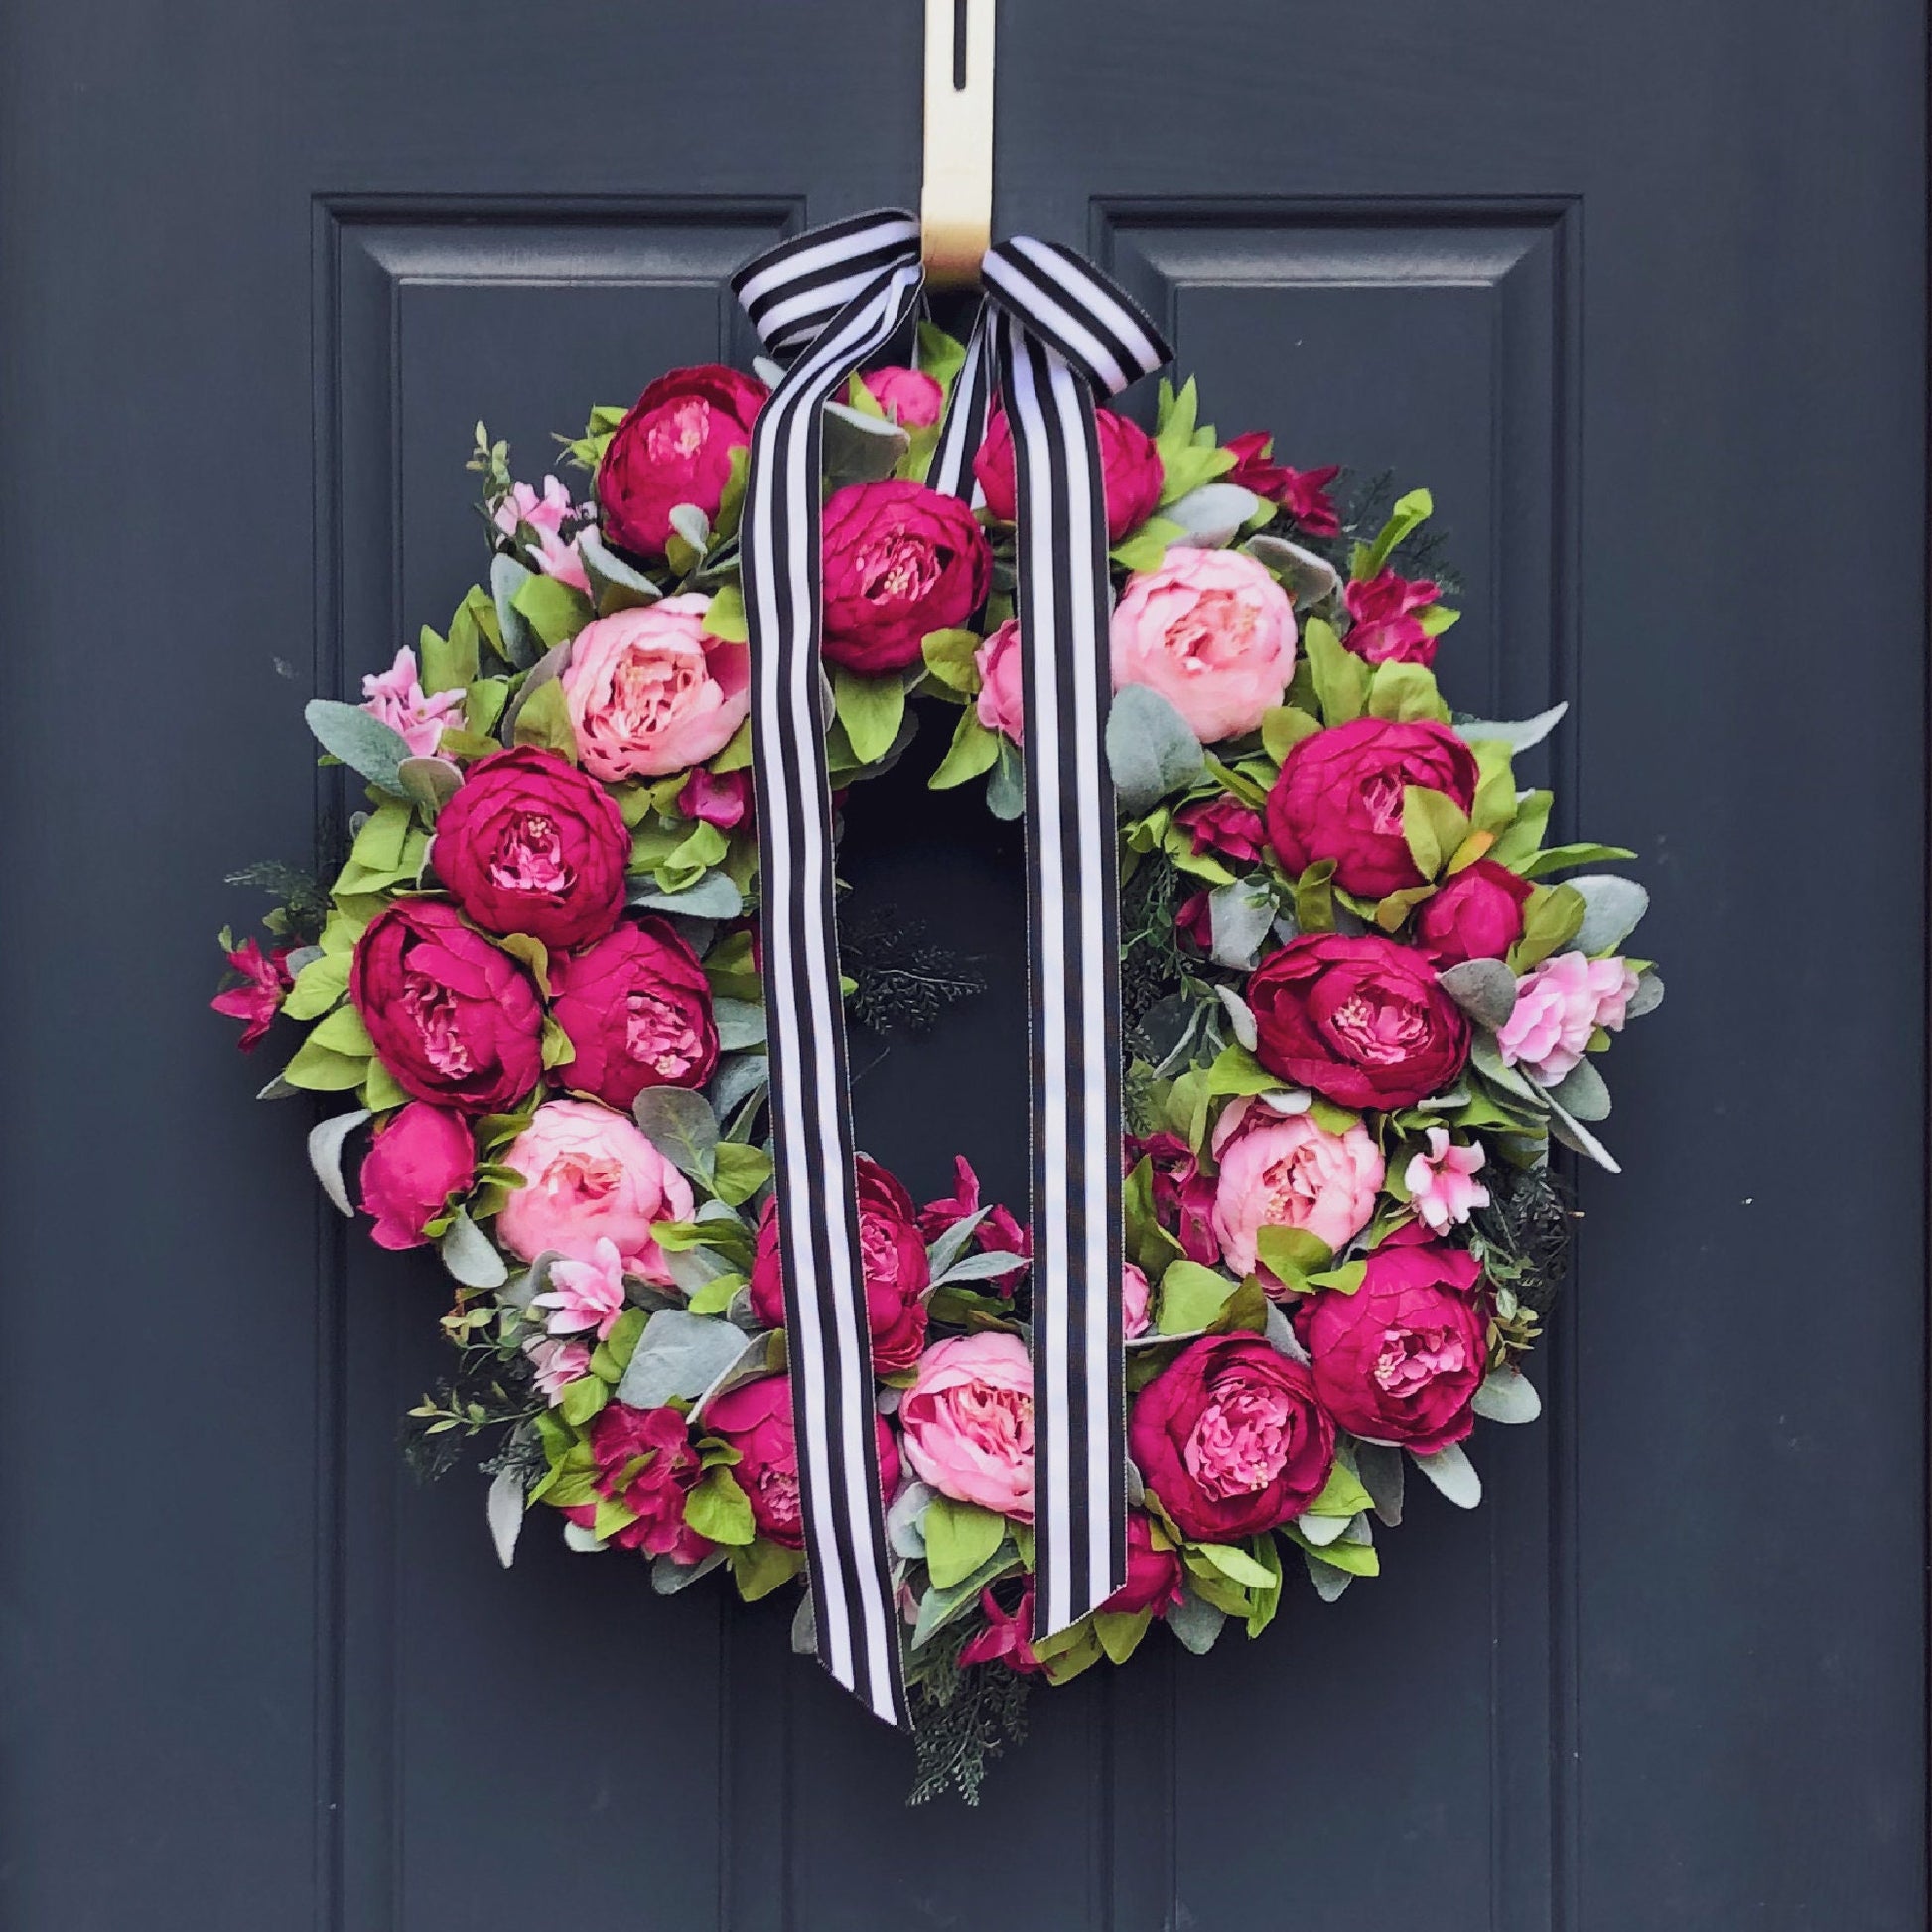 24" wreath has been handcrafted on a grapevine base and is trimmed with peonies in two shades of pink (pale pink & hot pink), hydrangeas, and other floral accents on a bed of flocked lambs ear and is finished with a black & white striped bow. 